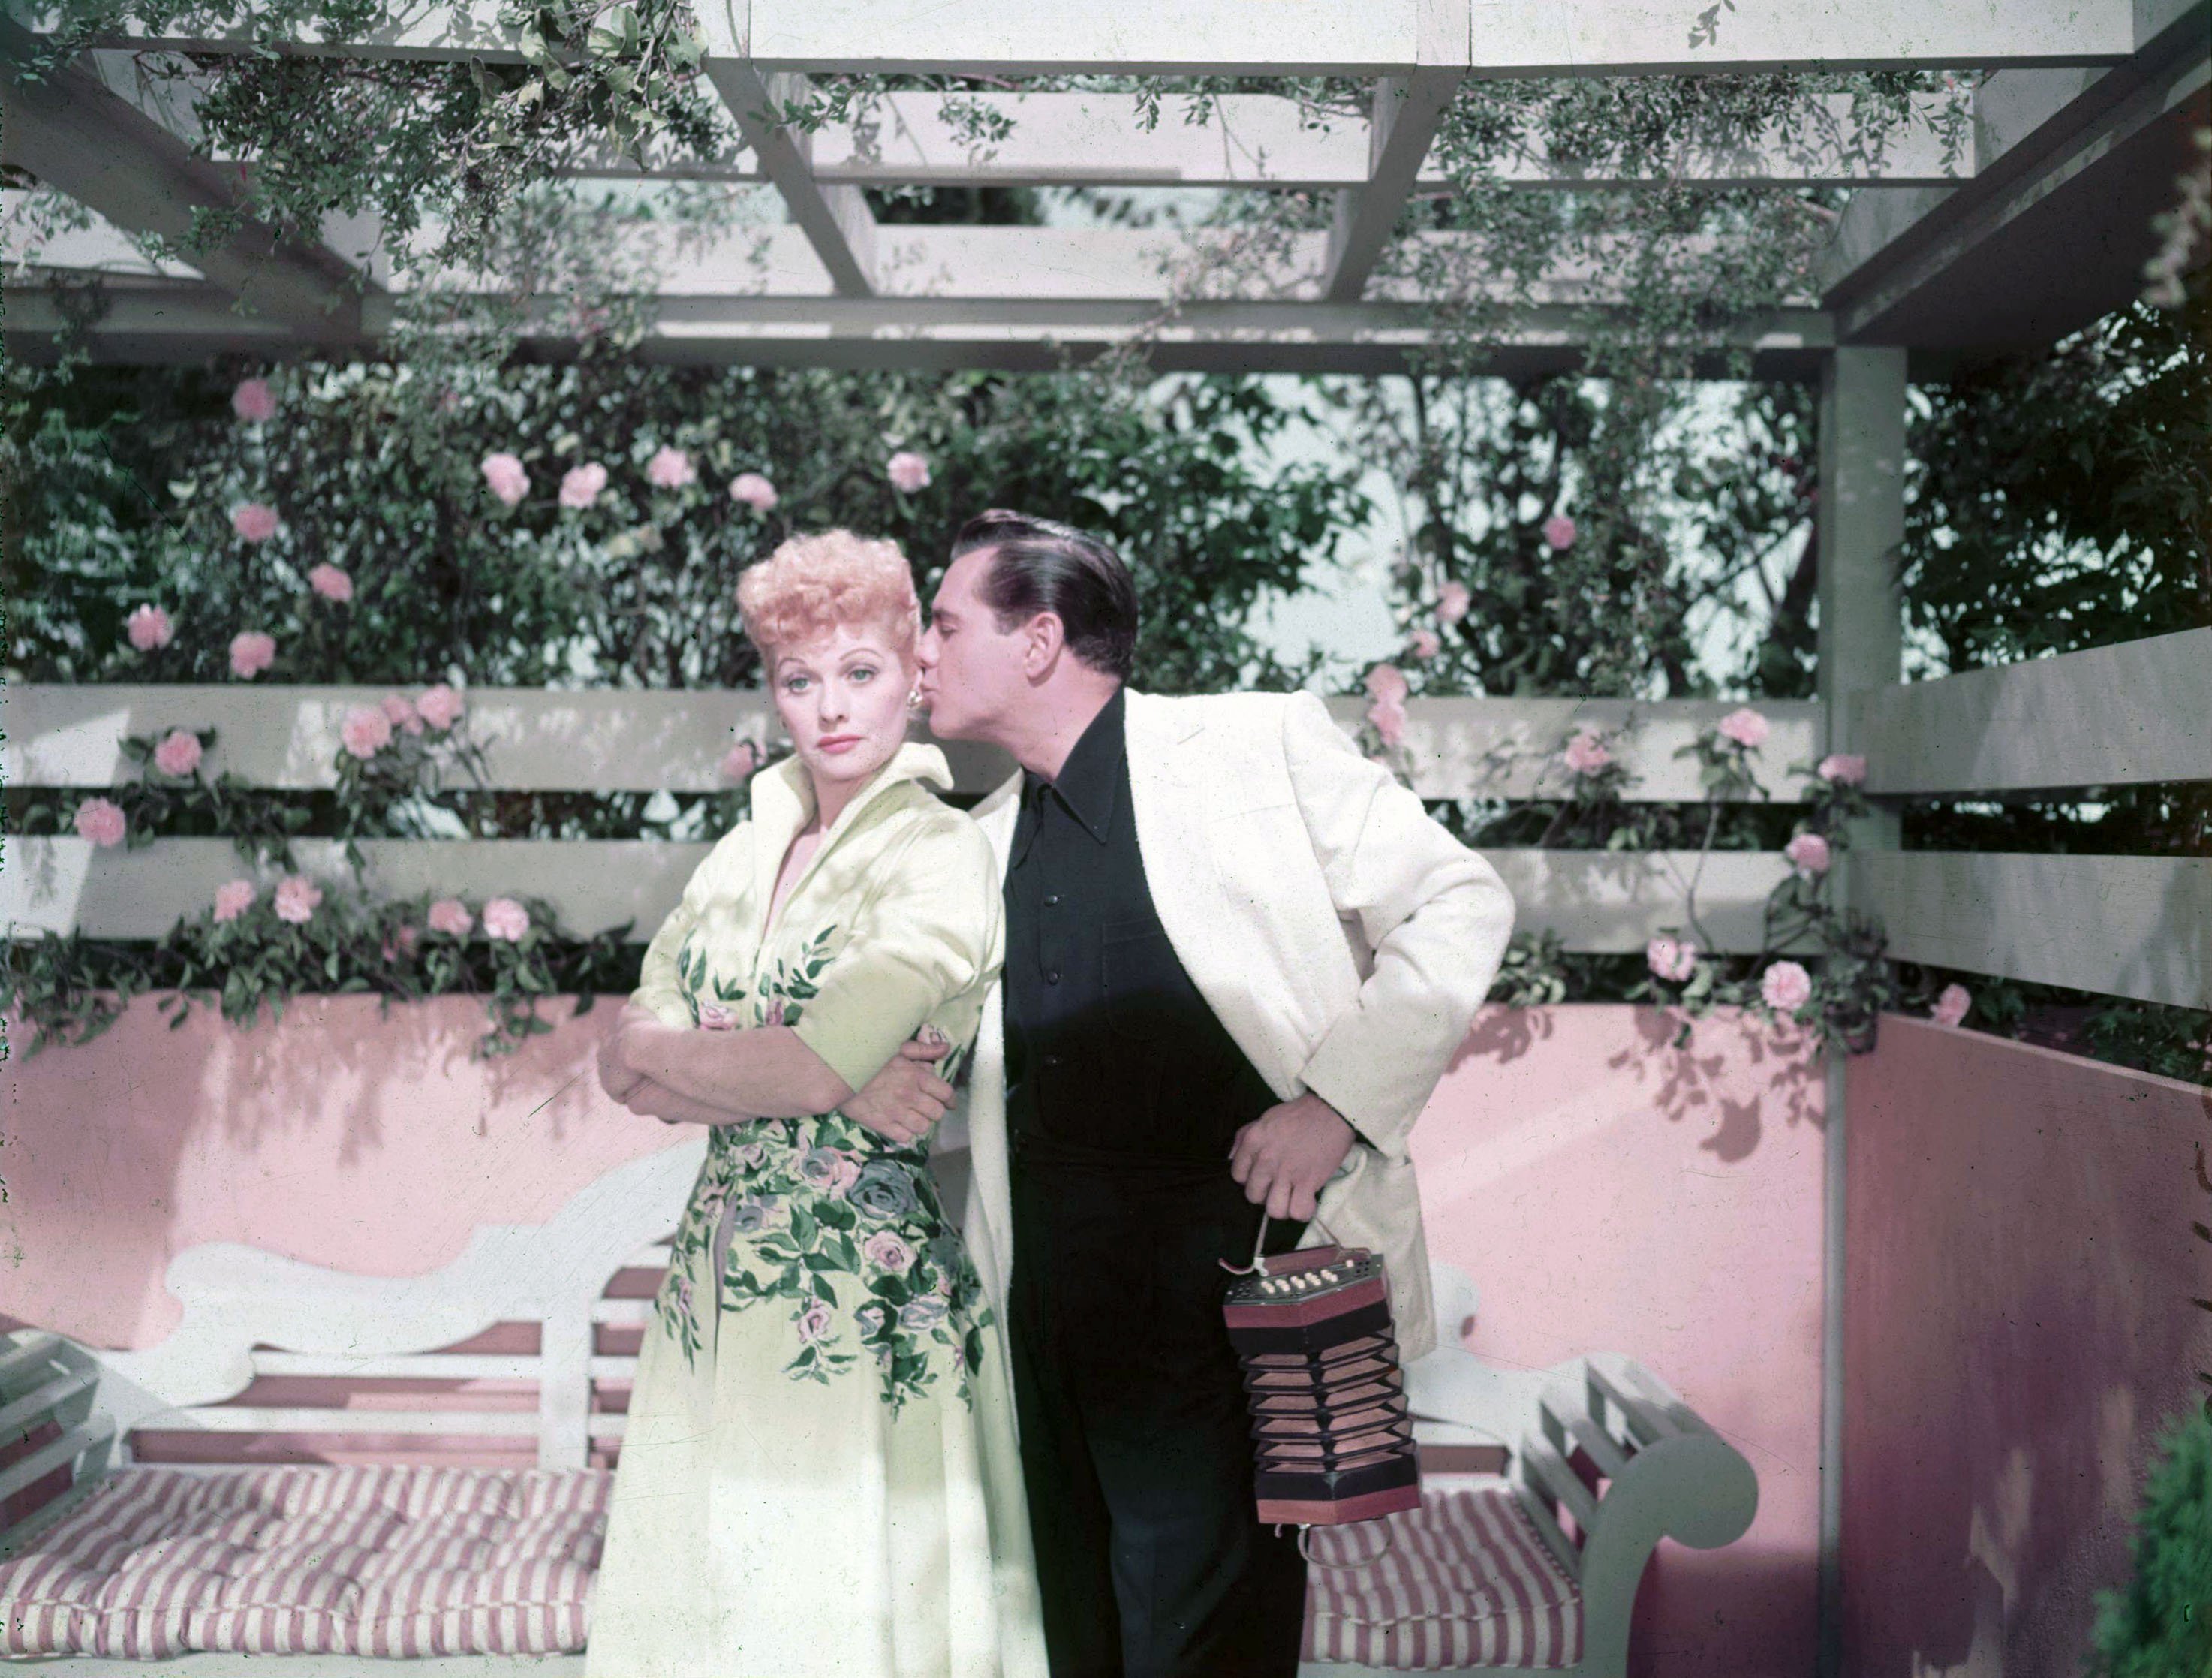 ‘I Love Lucy’: Lucille Ball Said She and Desi Arnaz ‘Never Really Liked Each Other’